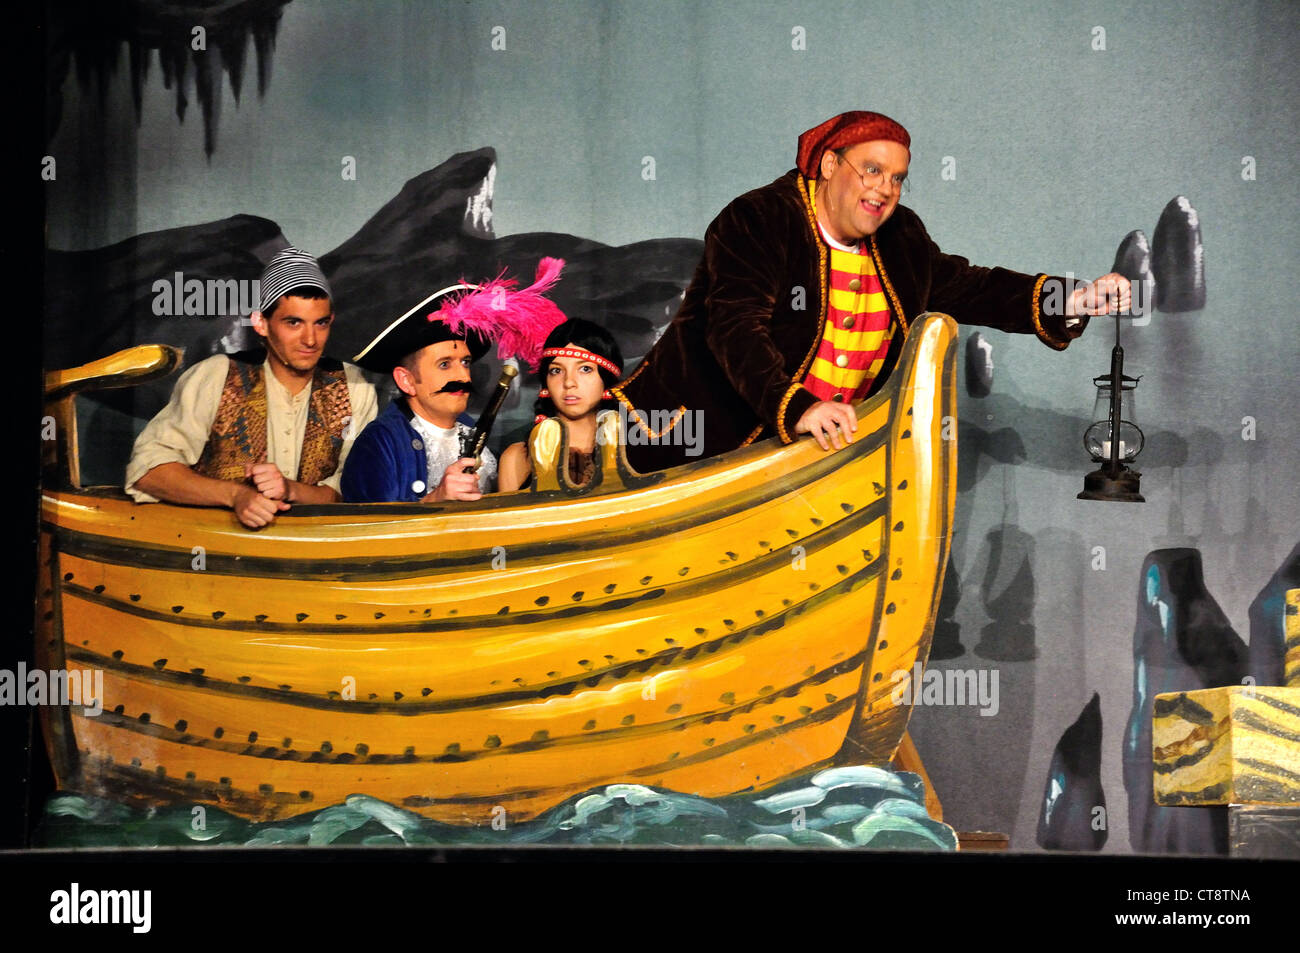 'Peter Pan The Musical' amateur dramatic production, Hounslow, Greater London, England, United Kingdom Stock Photo